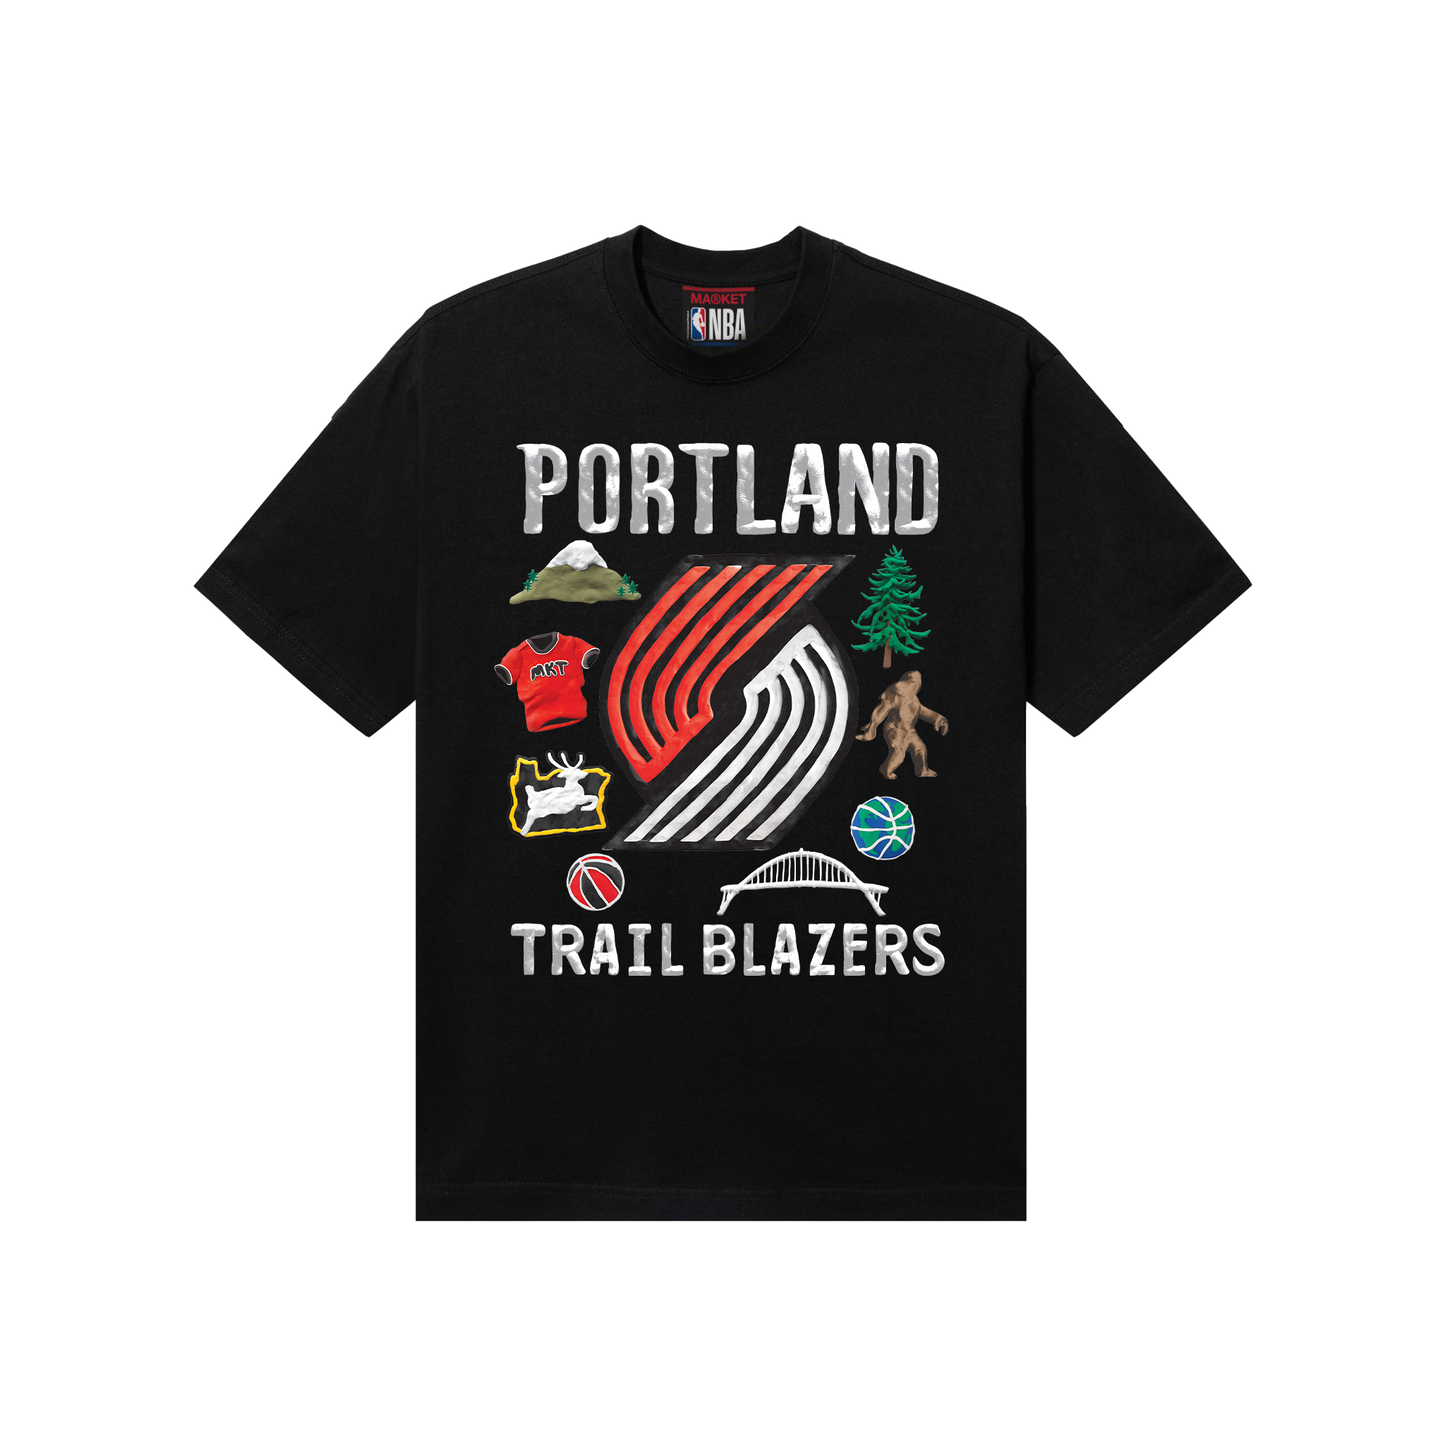 MARKET clothing brand MARKET TRAIL BLAZERS T-SHIRT. Find more graphic tees, hats, hoodies and more at MarketStudios.com. Formally Chinatown Market.